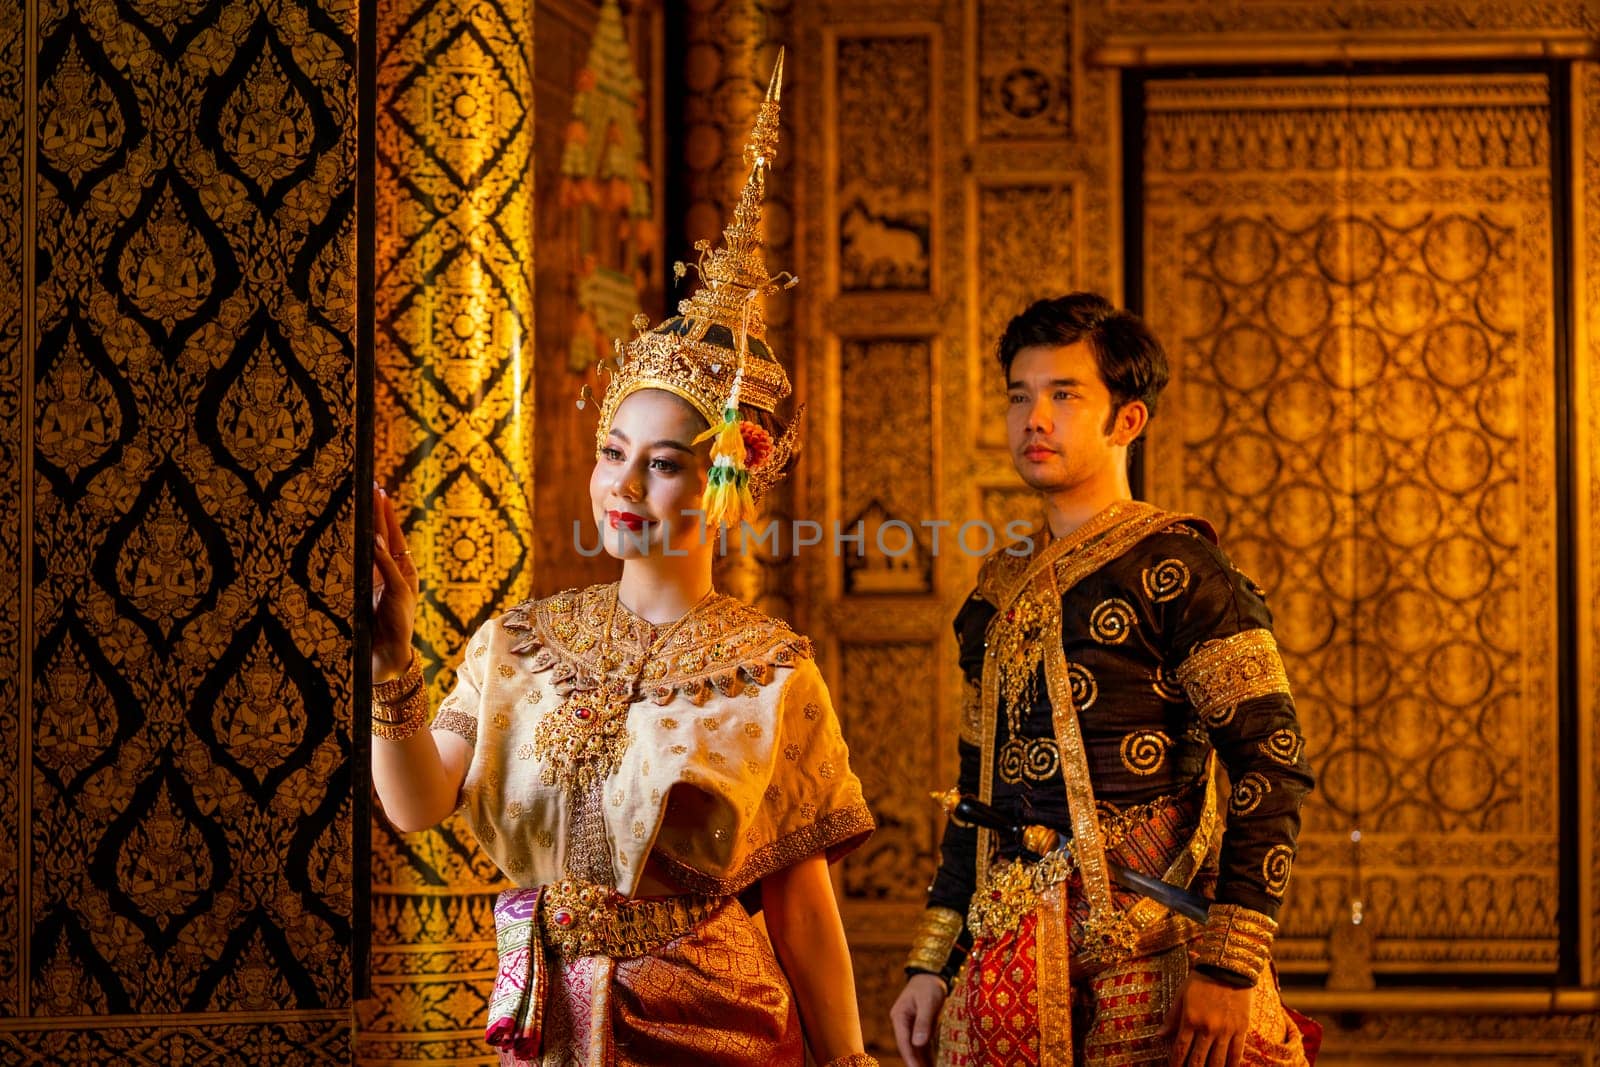 Beautiful Asian woman with Thai traditional dress stand in front of windows and look outside also Asian man with black traditional dress in the back.